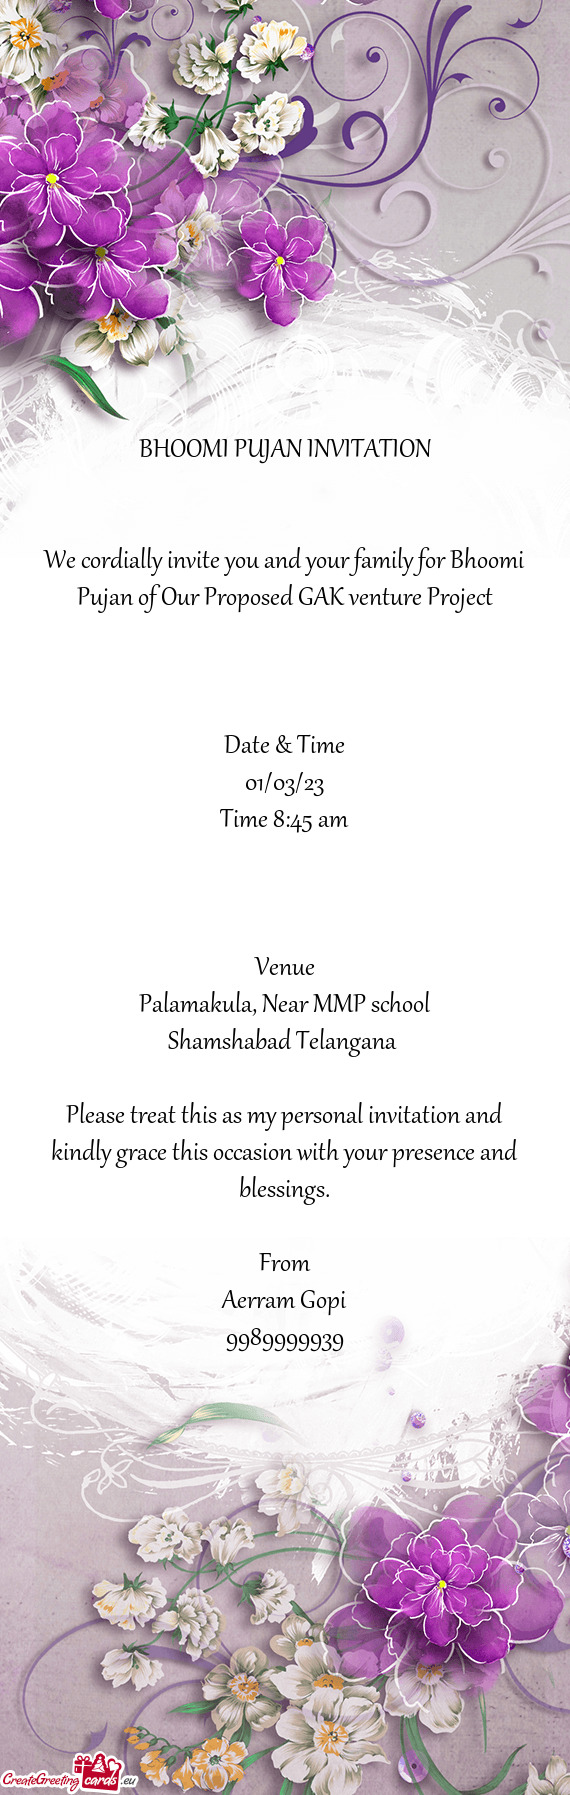 We cordially invite you and your family for Bhoomi Pujan of Our Proposed GAK venture Project